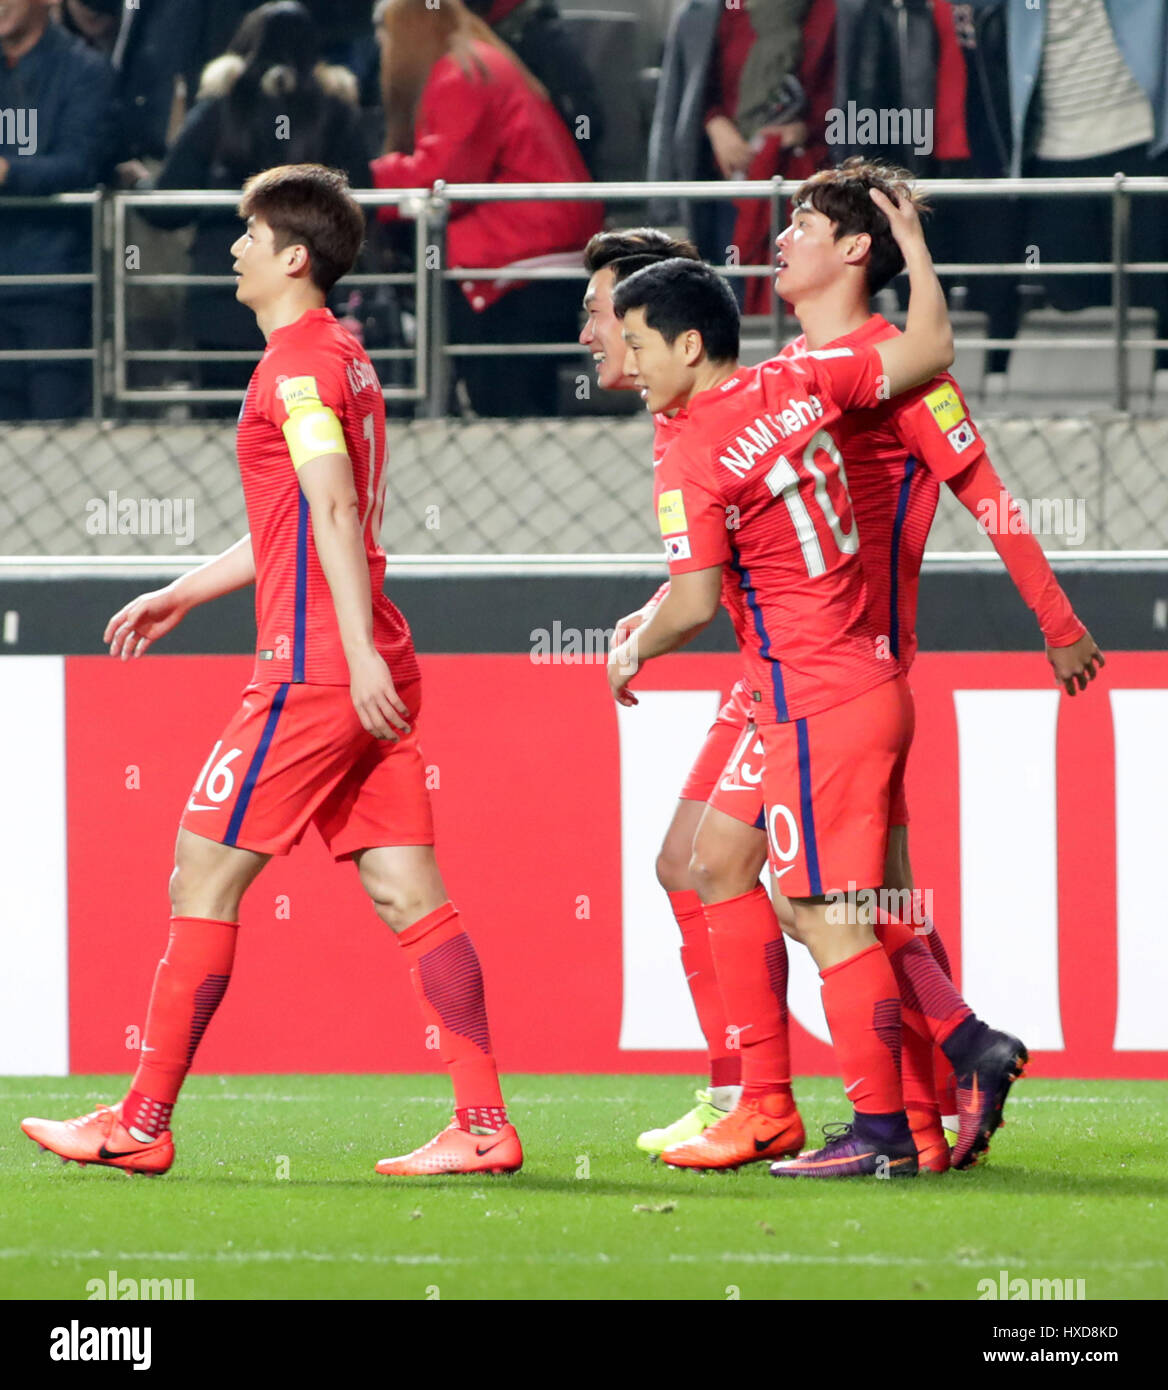 Seoul, South Korea. 28th Mar, 2017. South Korea's Hong Jeong-ho (R) celebrates after scoring during the FIFA World Cup Asia qualifier match between South Korea and Syria at World Cup Stadium in Seoul, South Korea on March 28, 2017. South Korea won by 1-0. Credit: Lee sang-ho/Xinhua/Alamy Live News Stock Photo